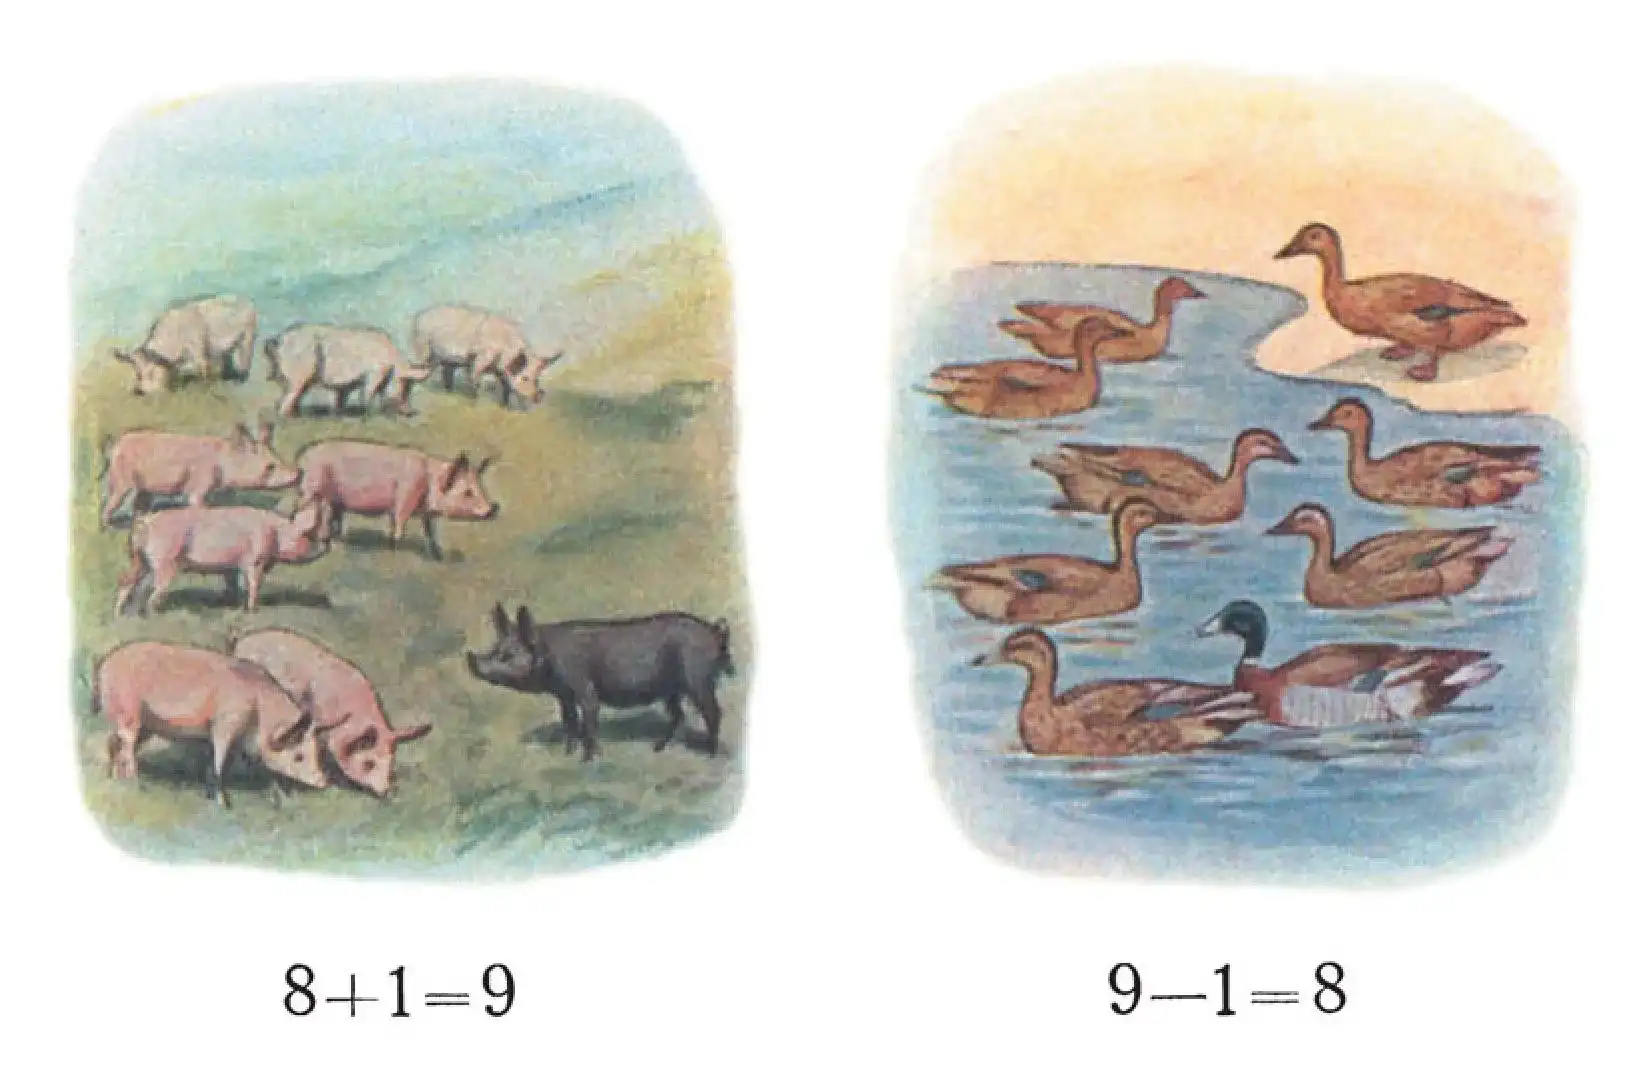 9 pigs and 9 ducks